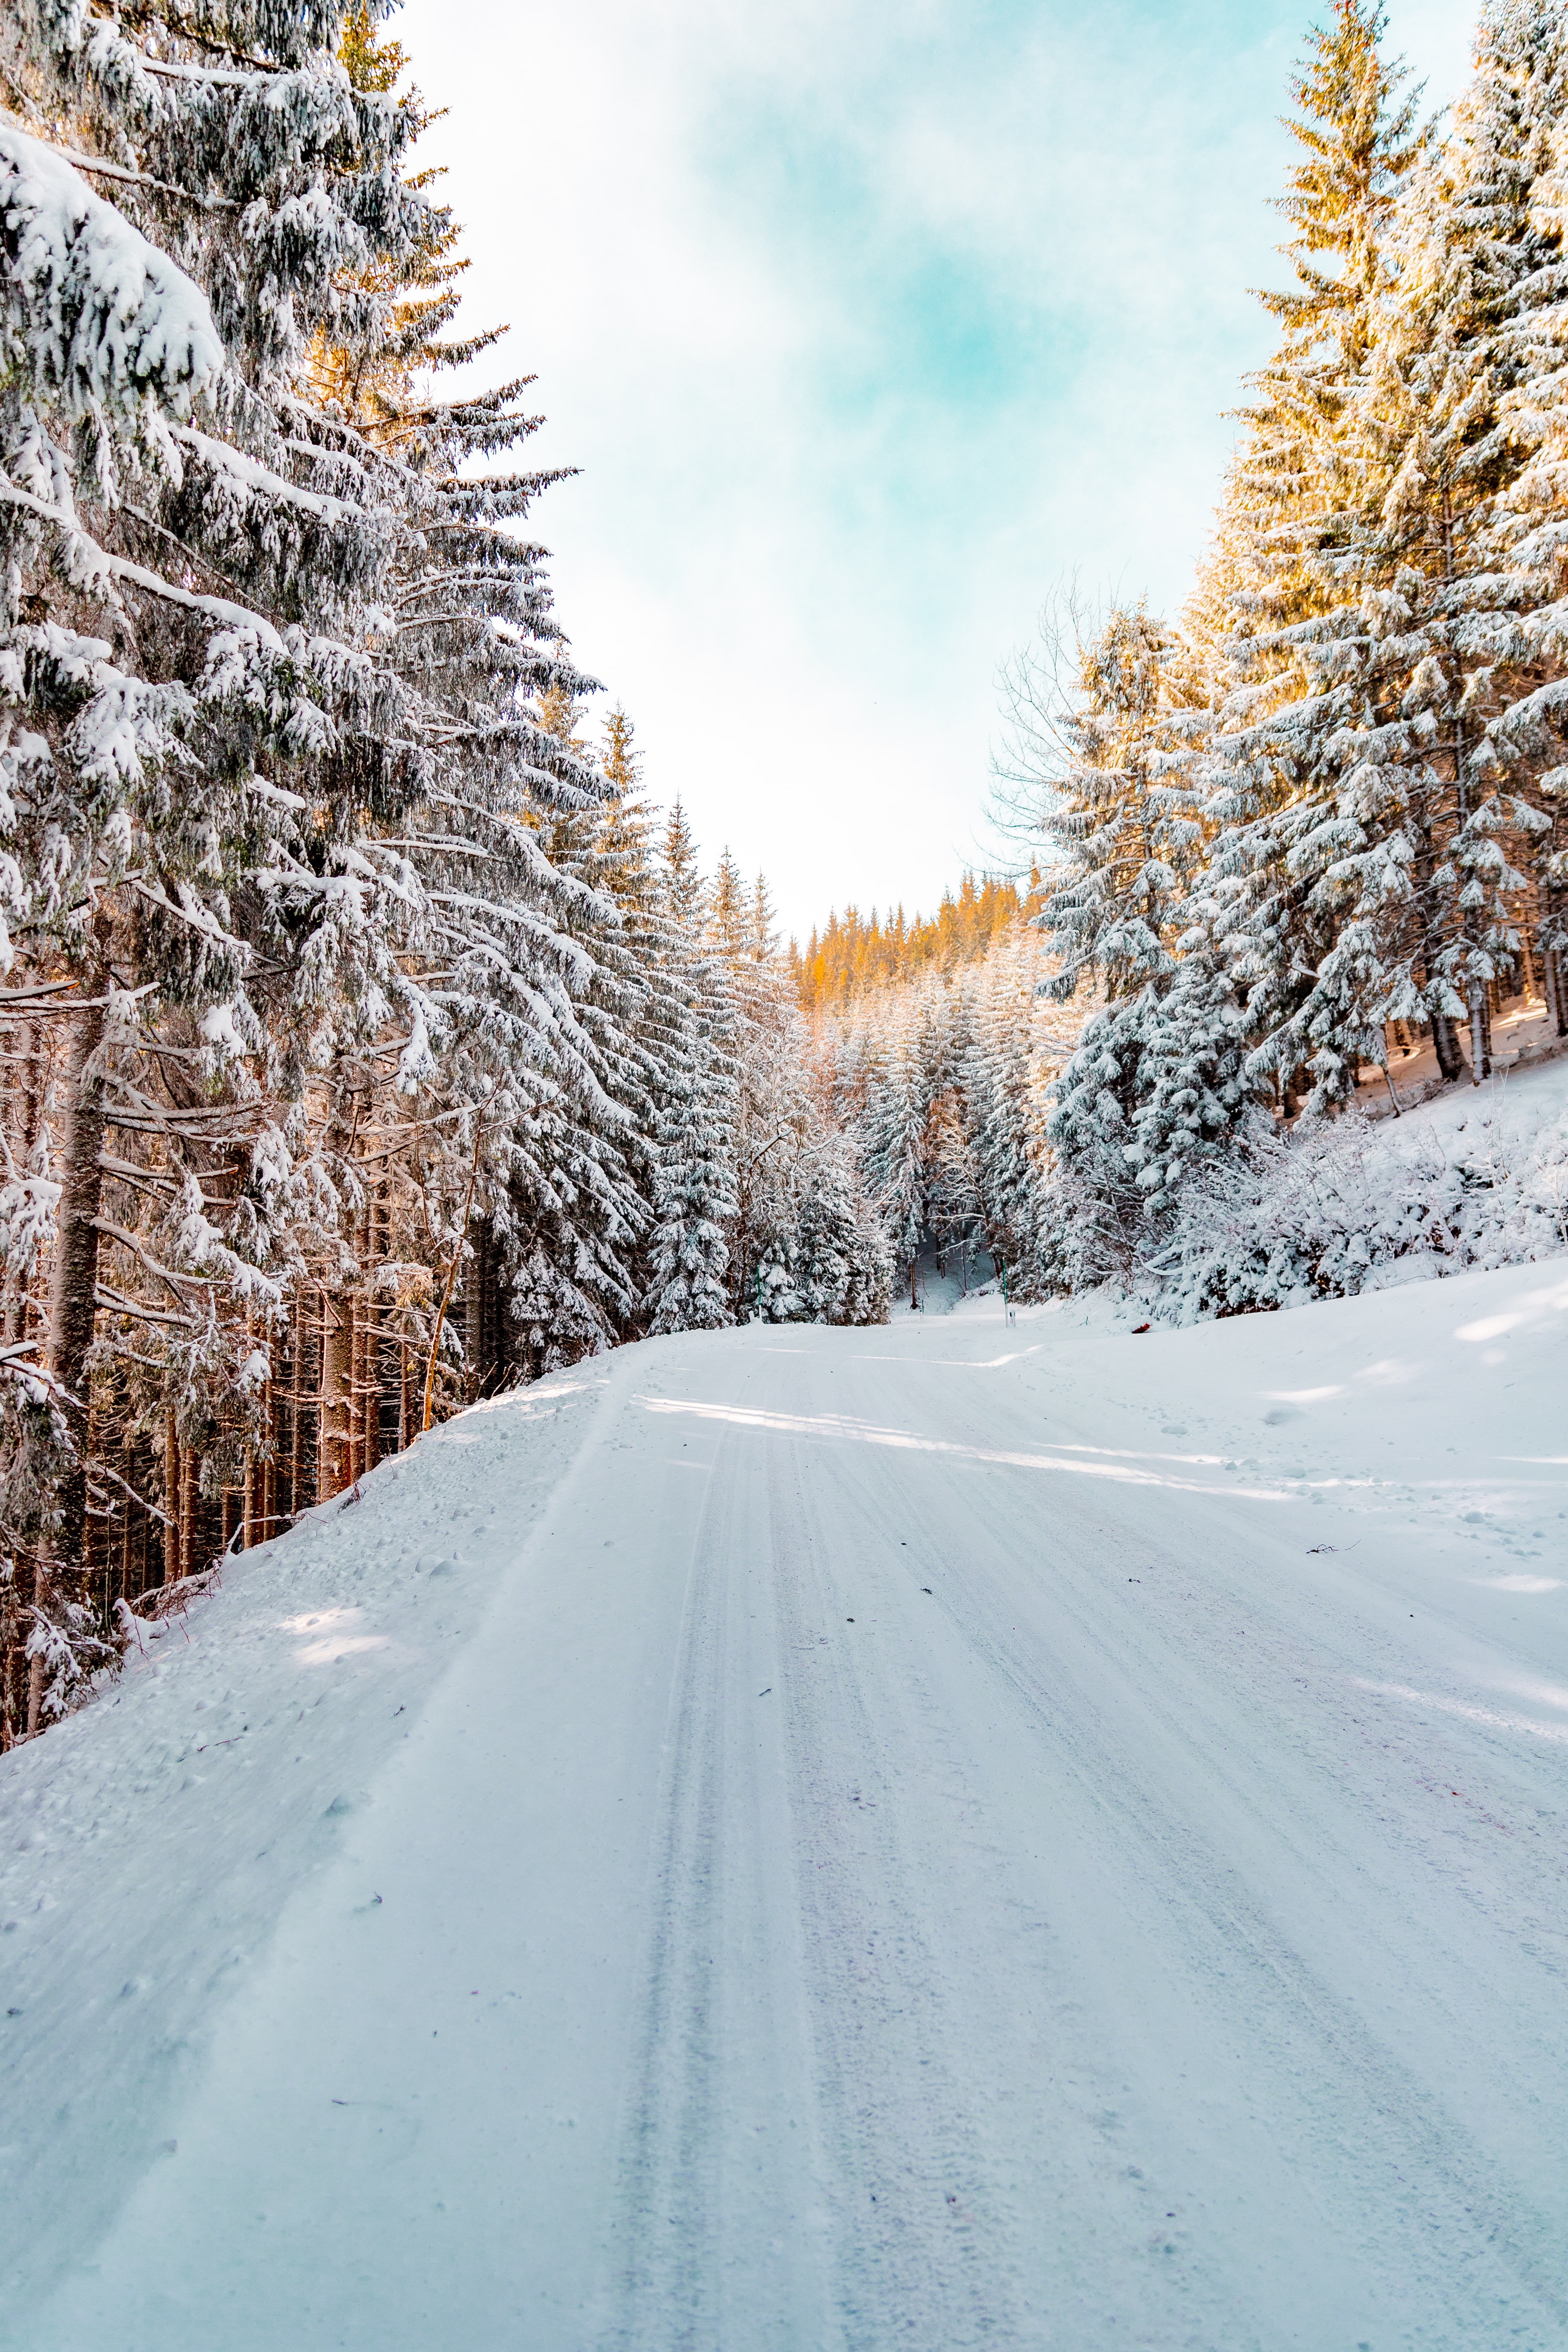 wallpapers sky, winter landscape, winter, road, nature, snow, forest